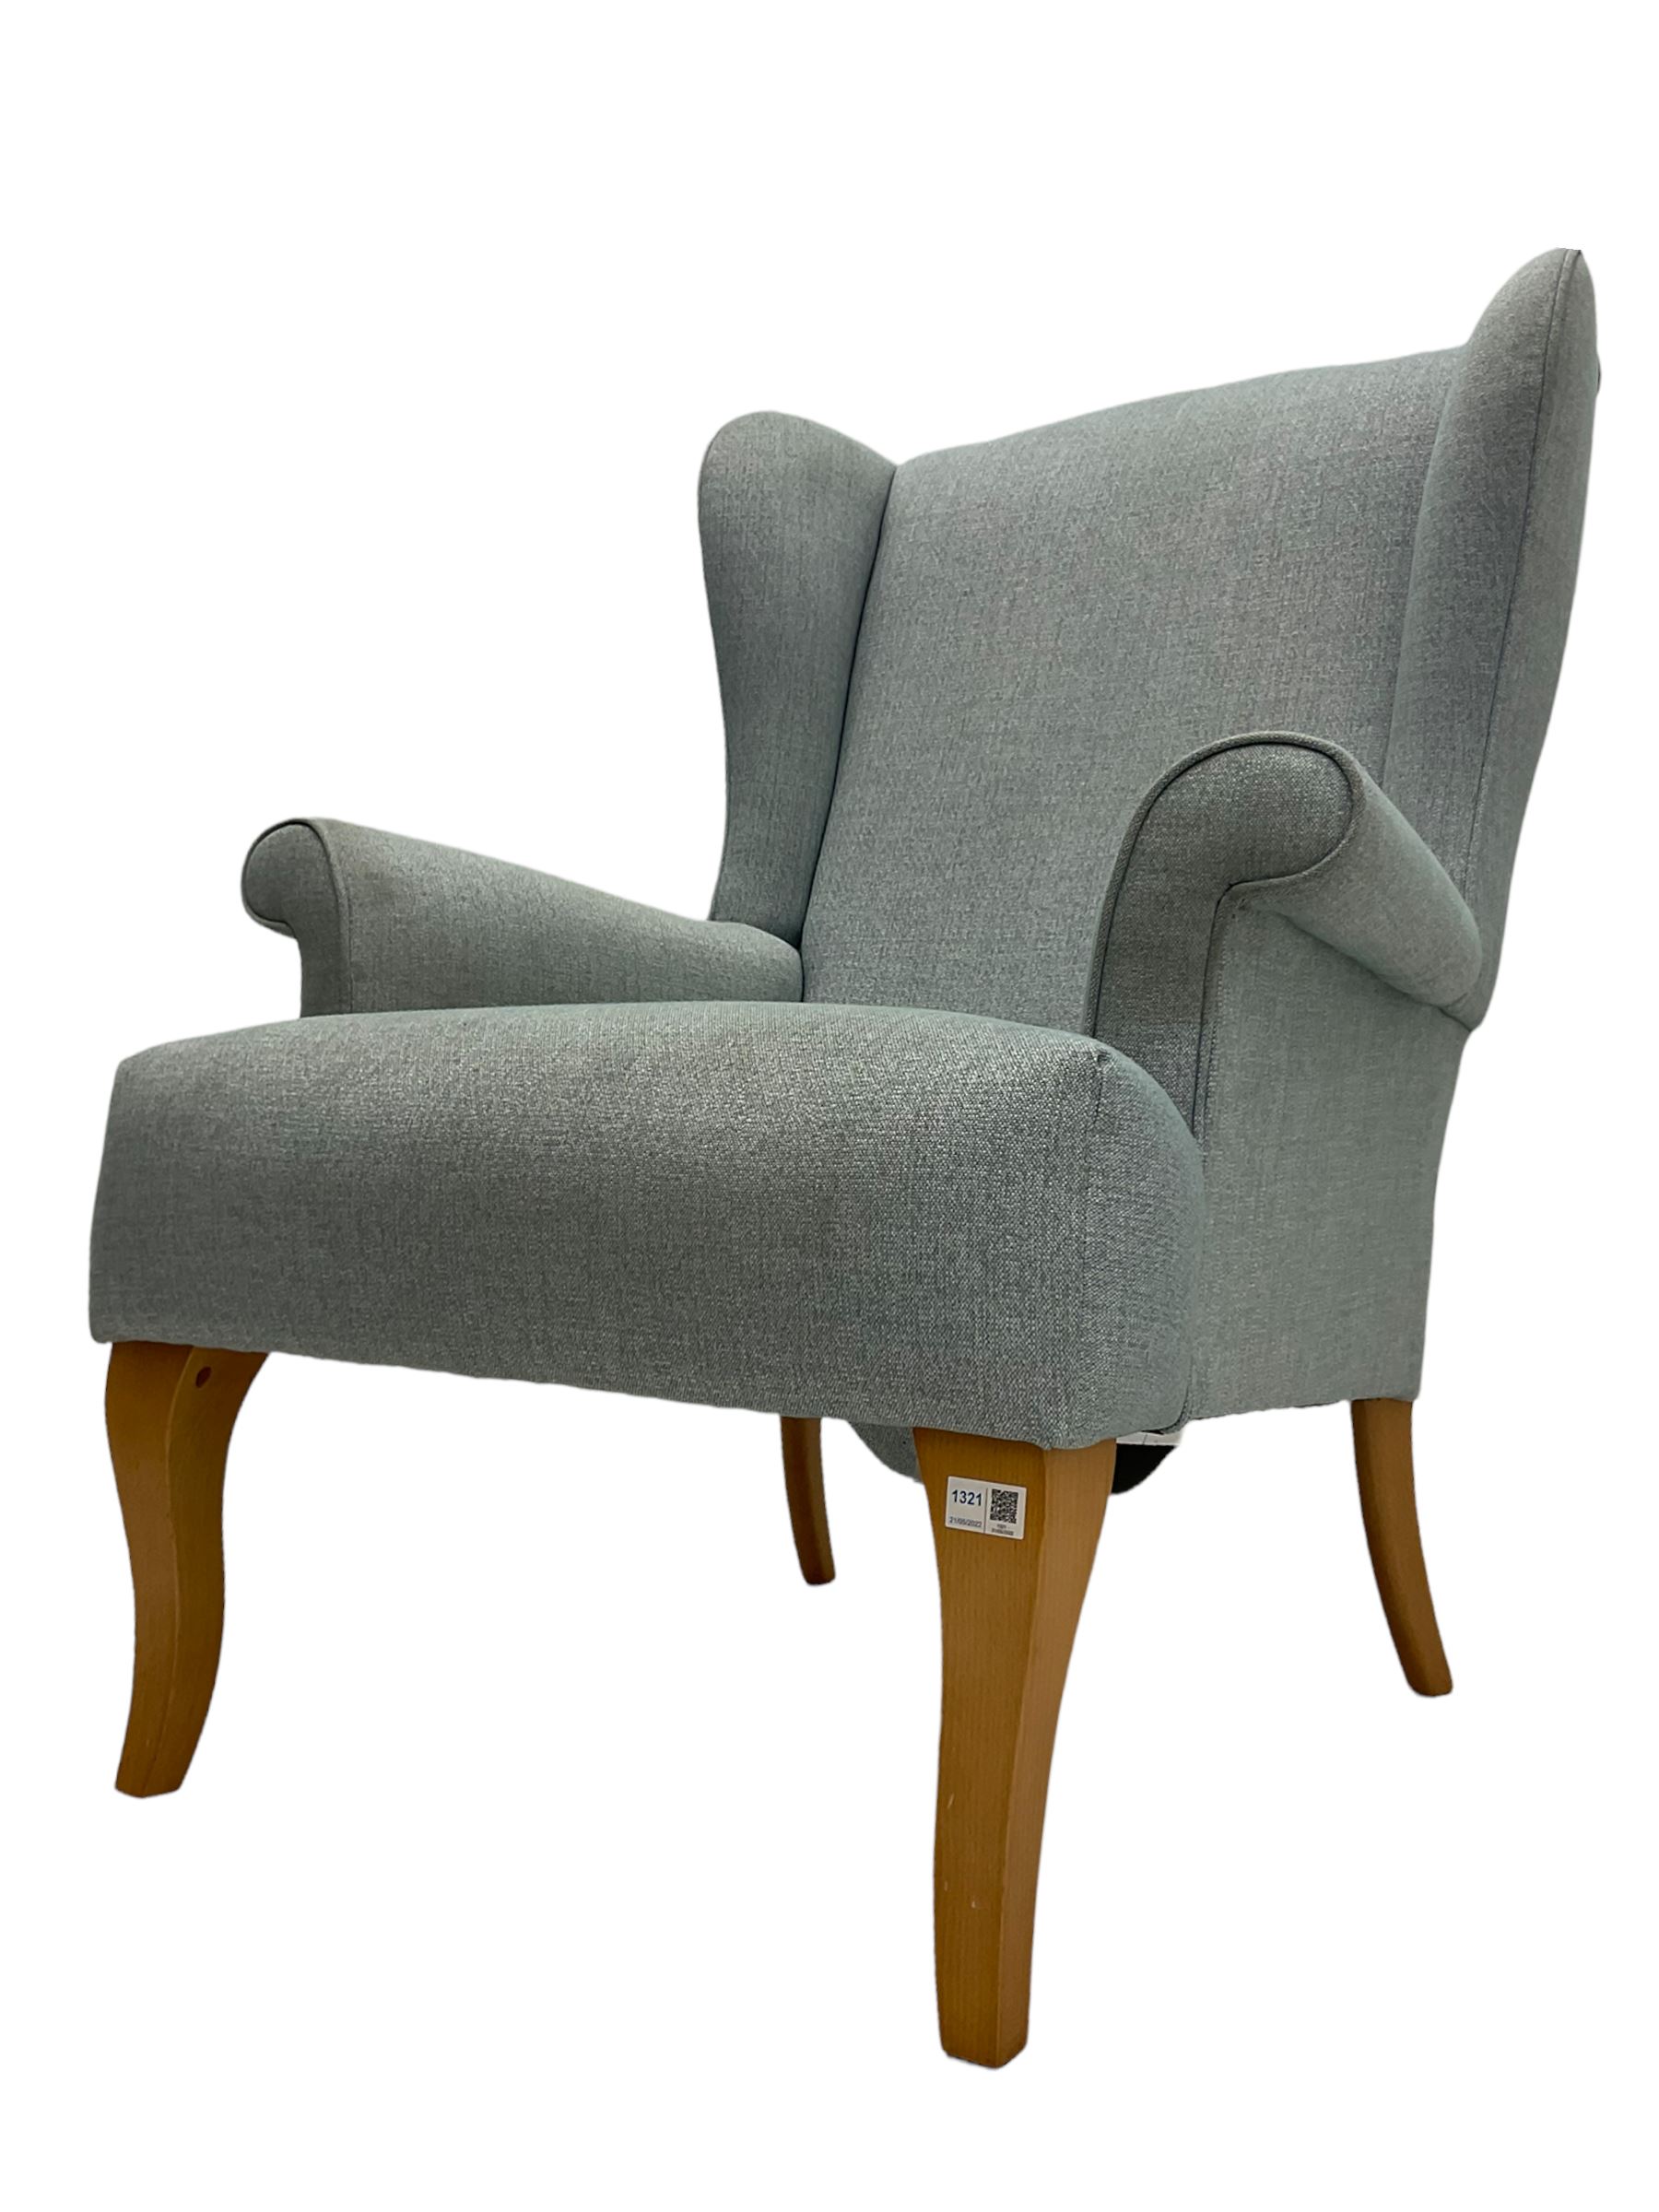 John Lewis high wing back armchair upholstered in denim cover - Image 6 of 6